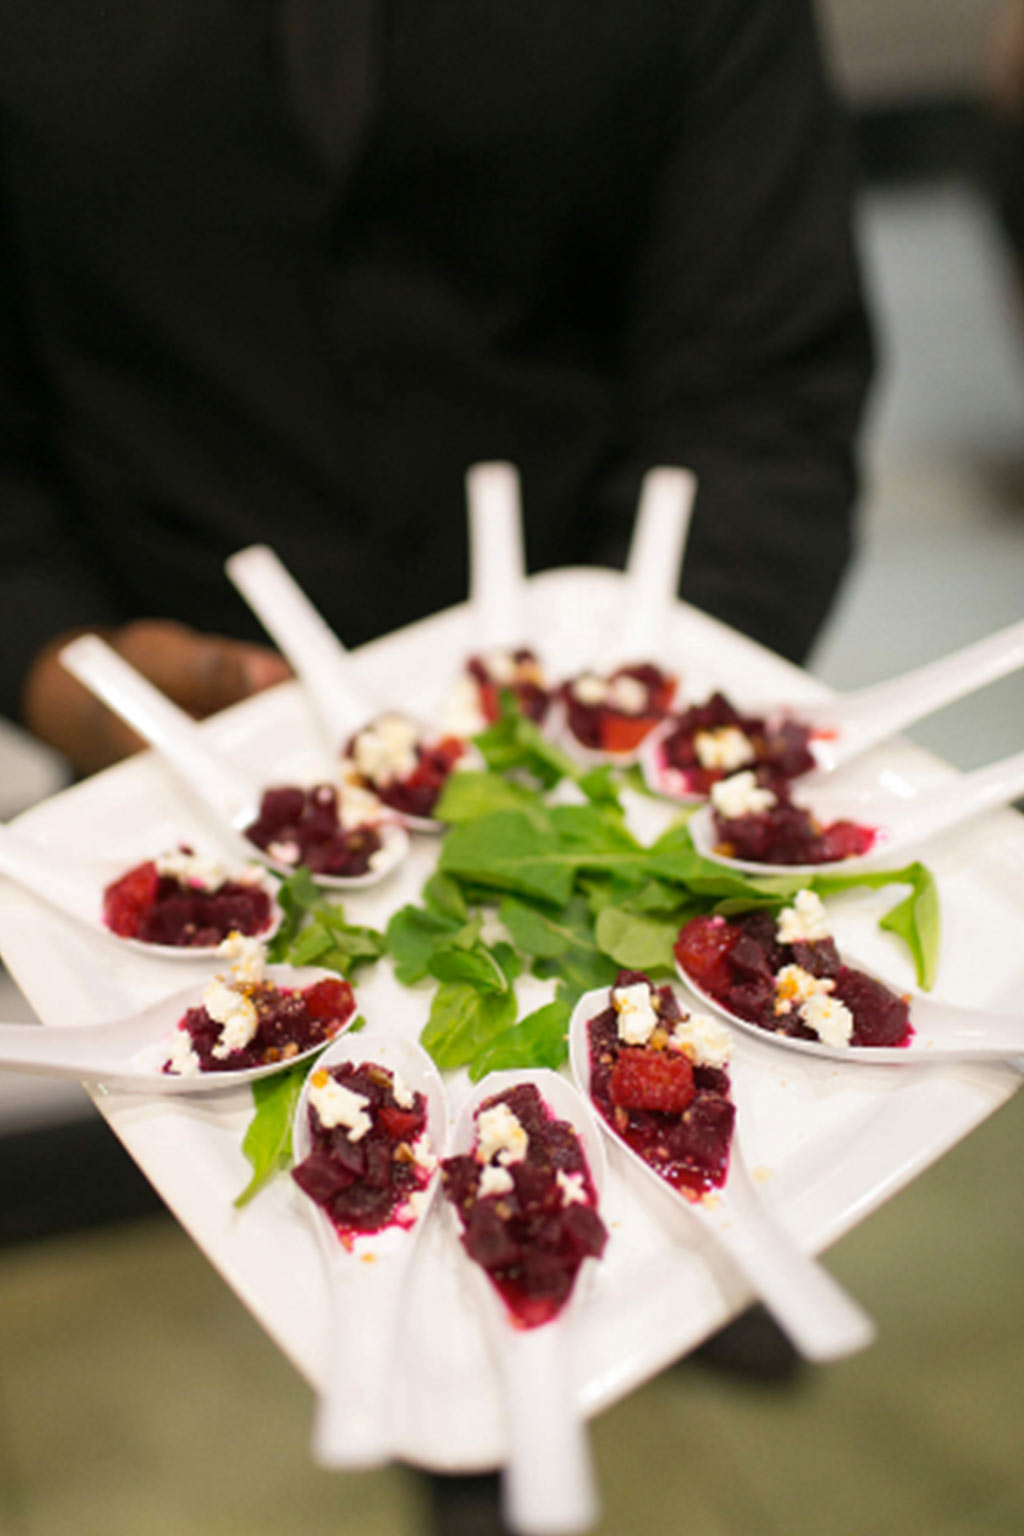 Beet spoon wedding reception hors d'oeuvres by Bolsa Catering